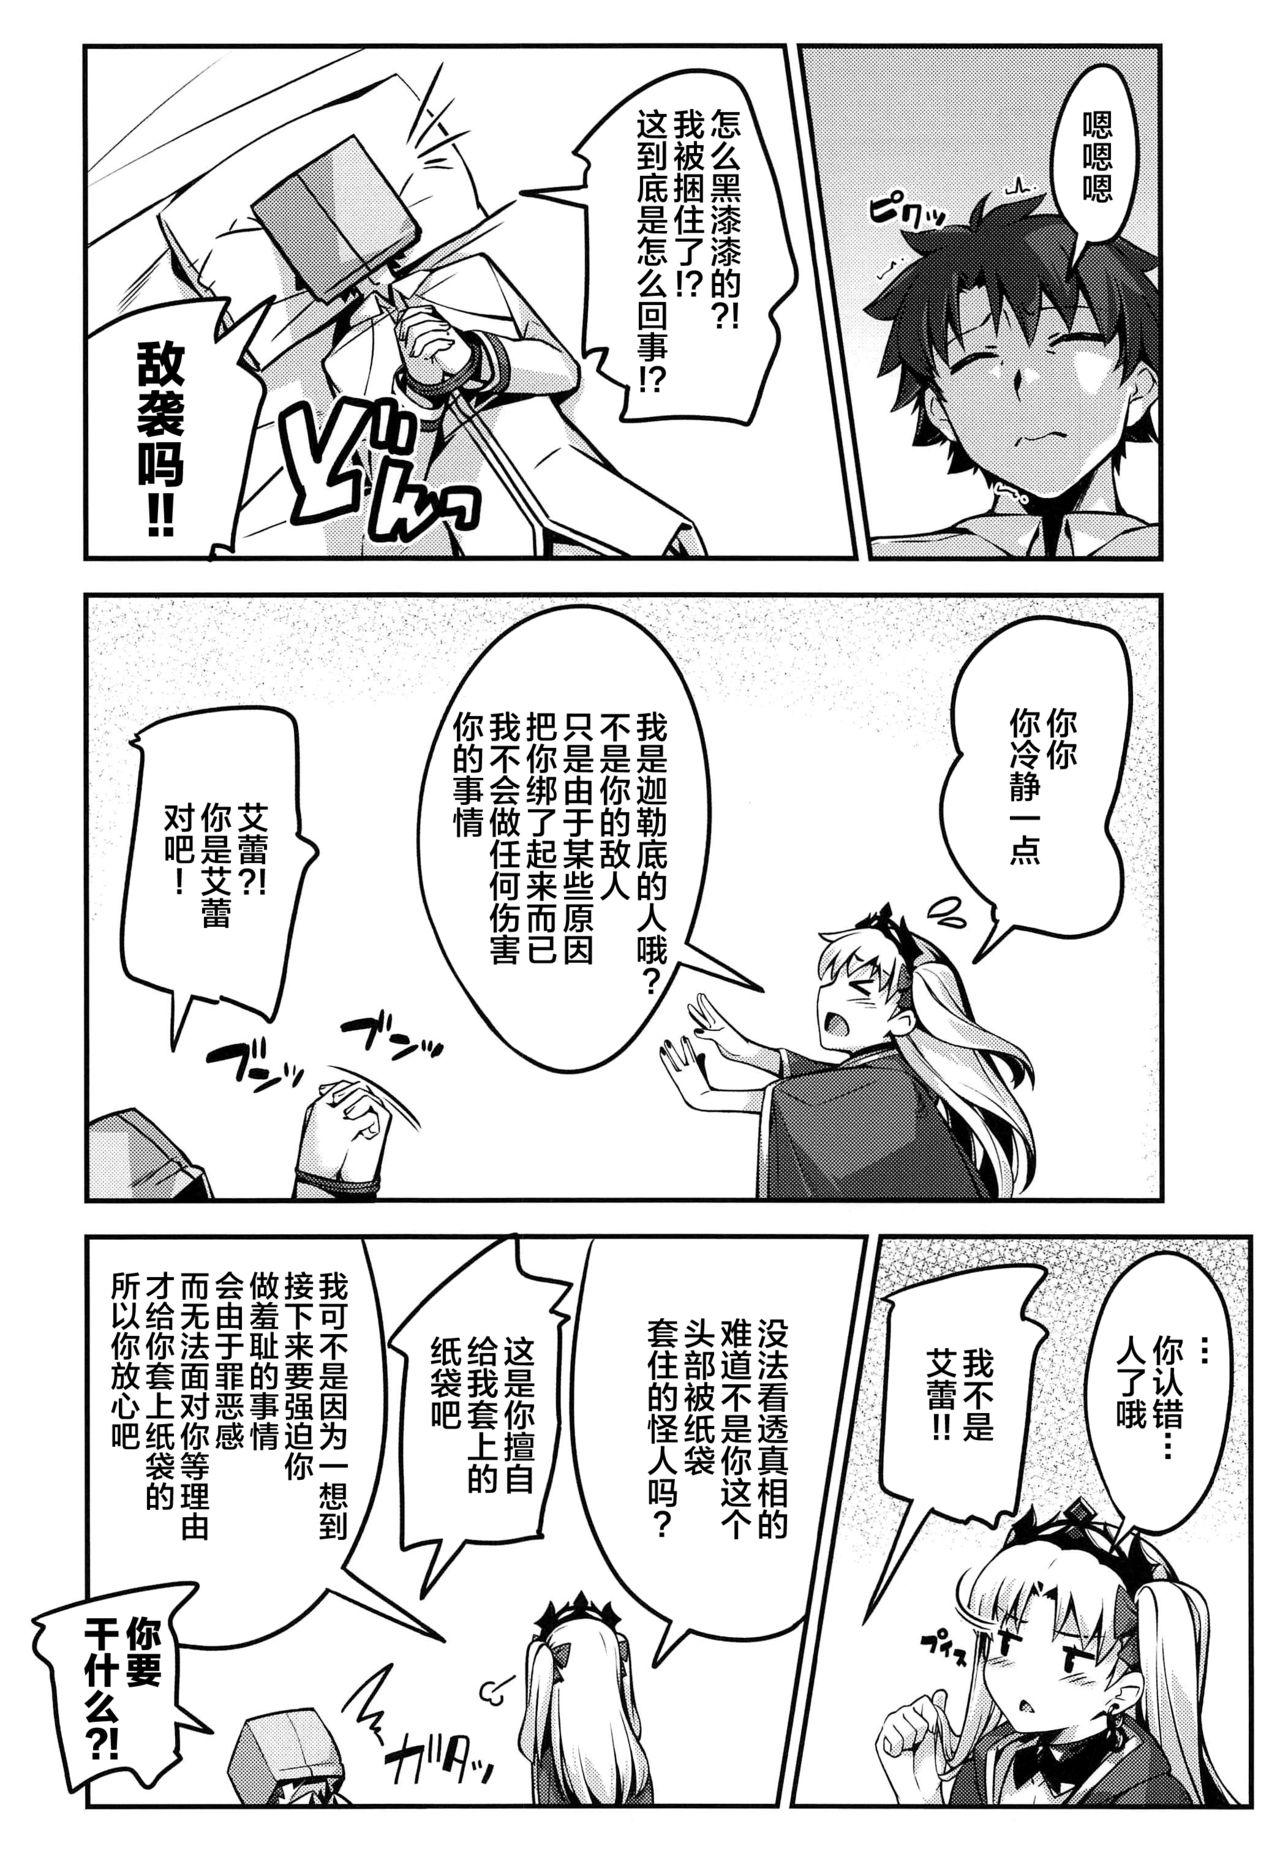 Topless Hiroigui. - Fate grand order Stepbrother - Page 7